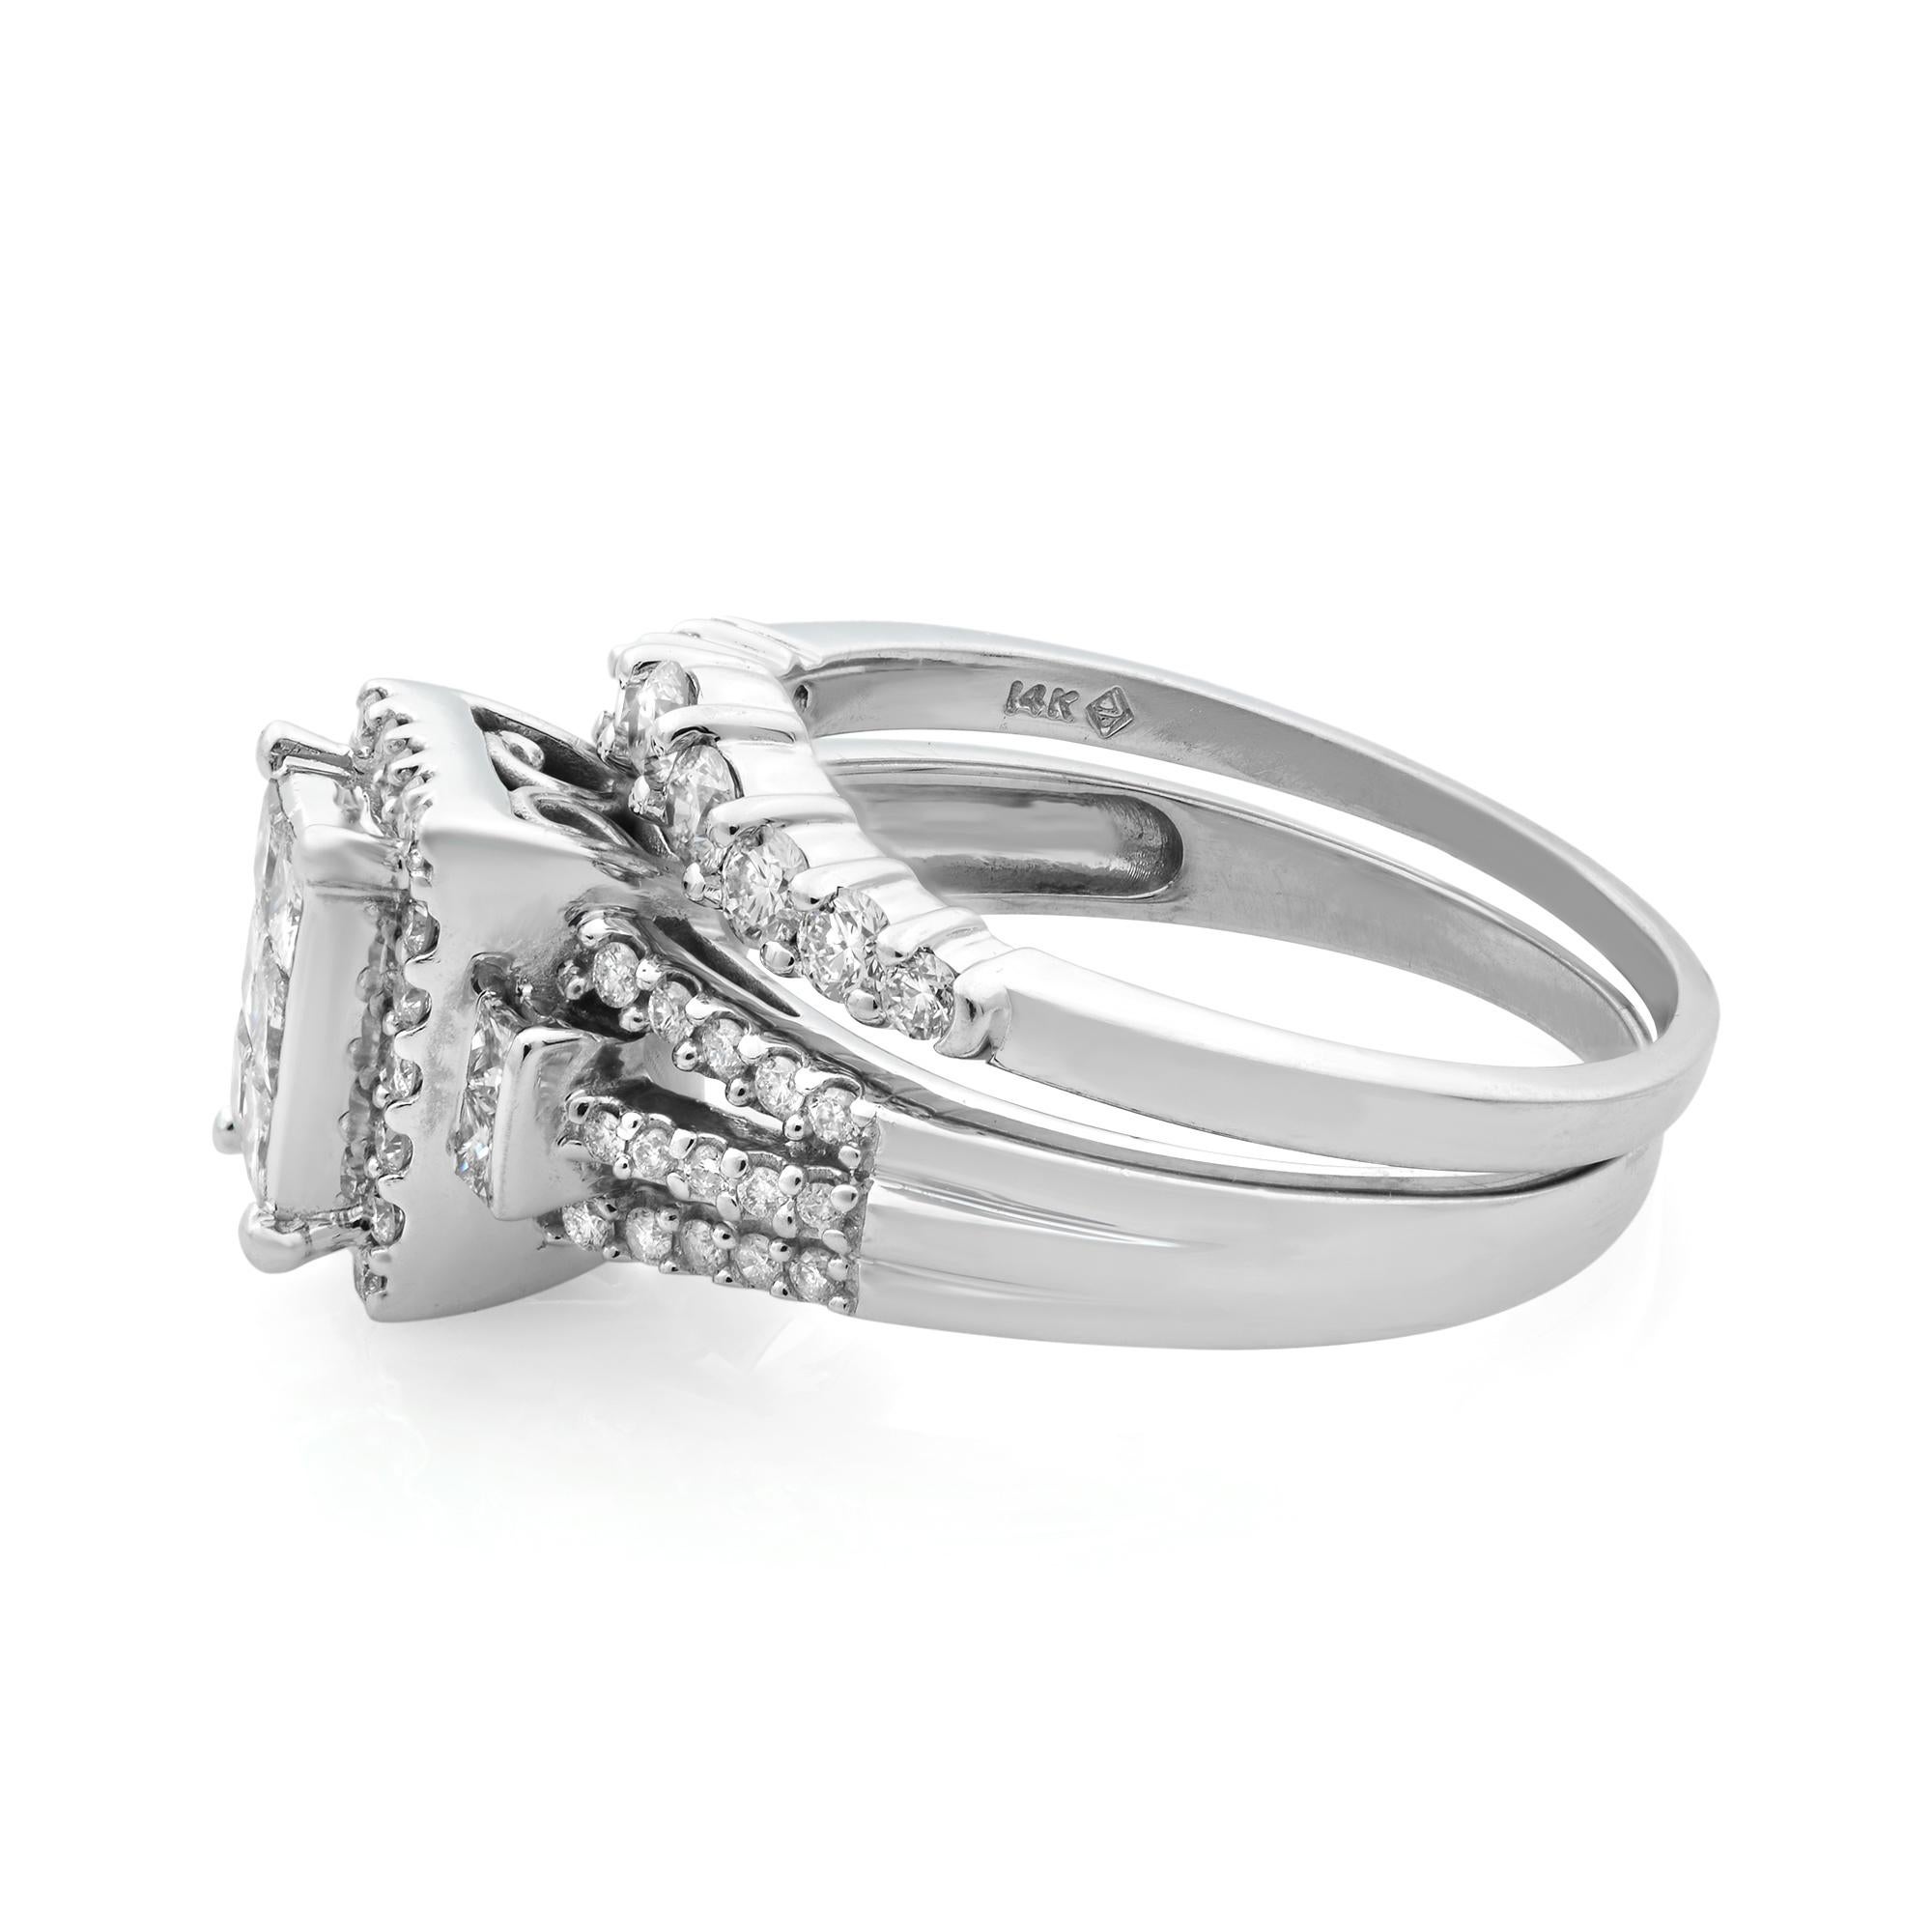 Rachel Koen Diamond Engagement Set of Rings 14K White Gold 1.5cttw In New Condition For Sale In New York, NY